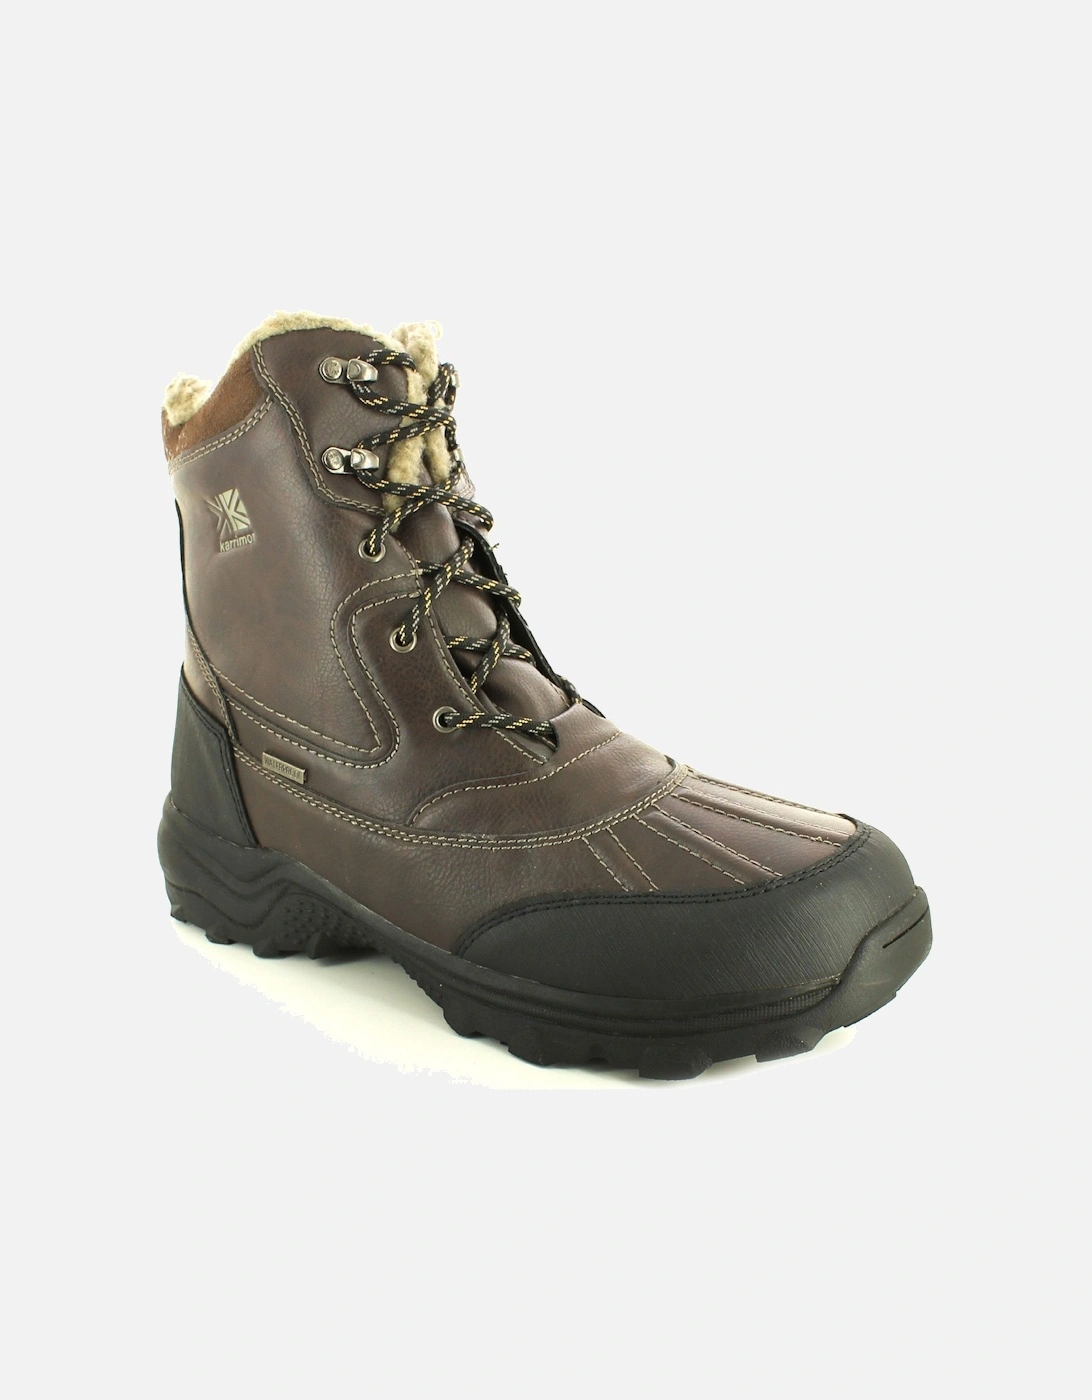 Mens Walking Boots Snow Casual 3 Lace Up brown UK Size, 6 of 5